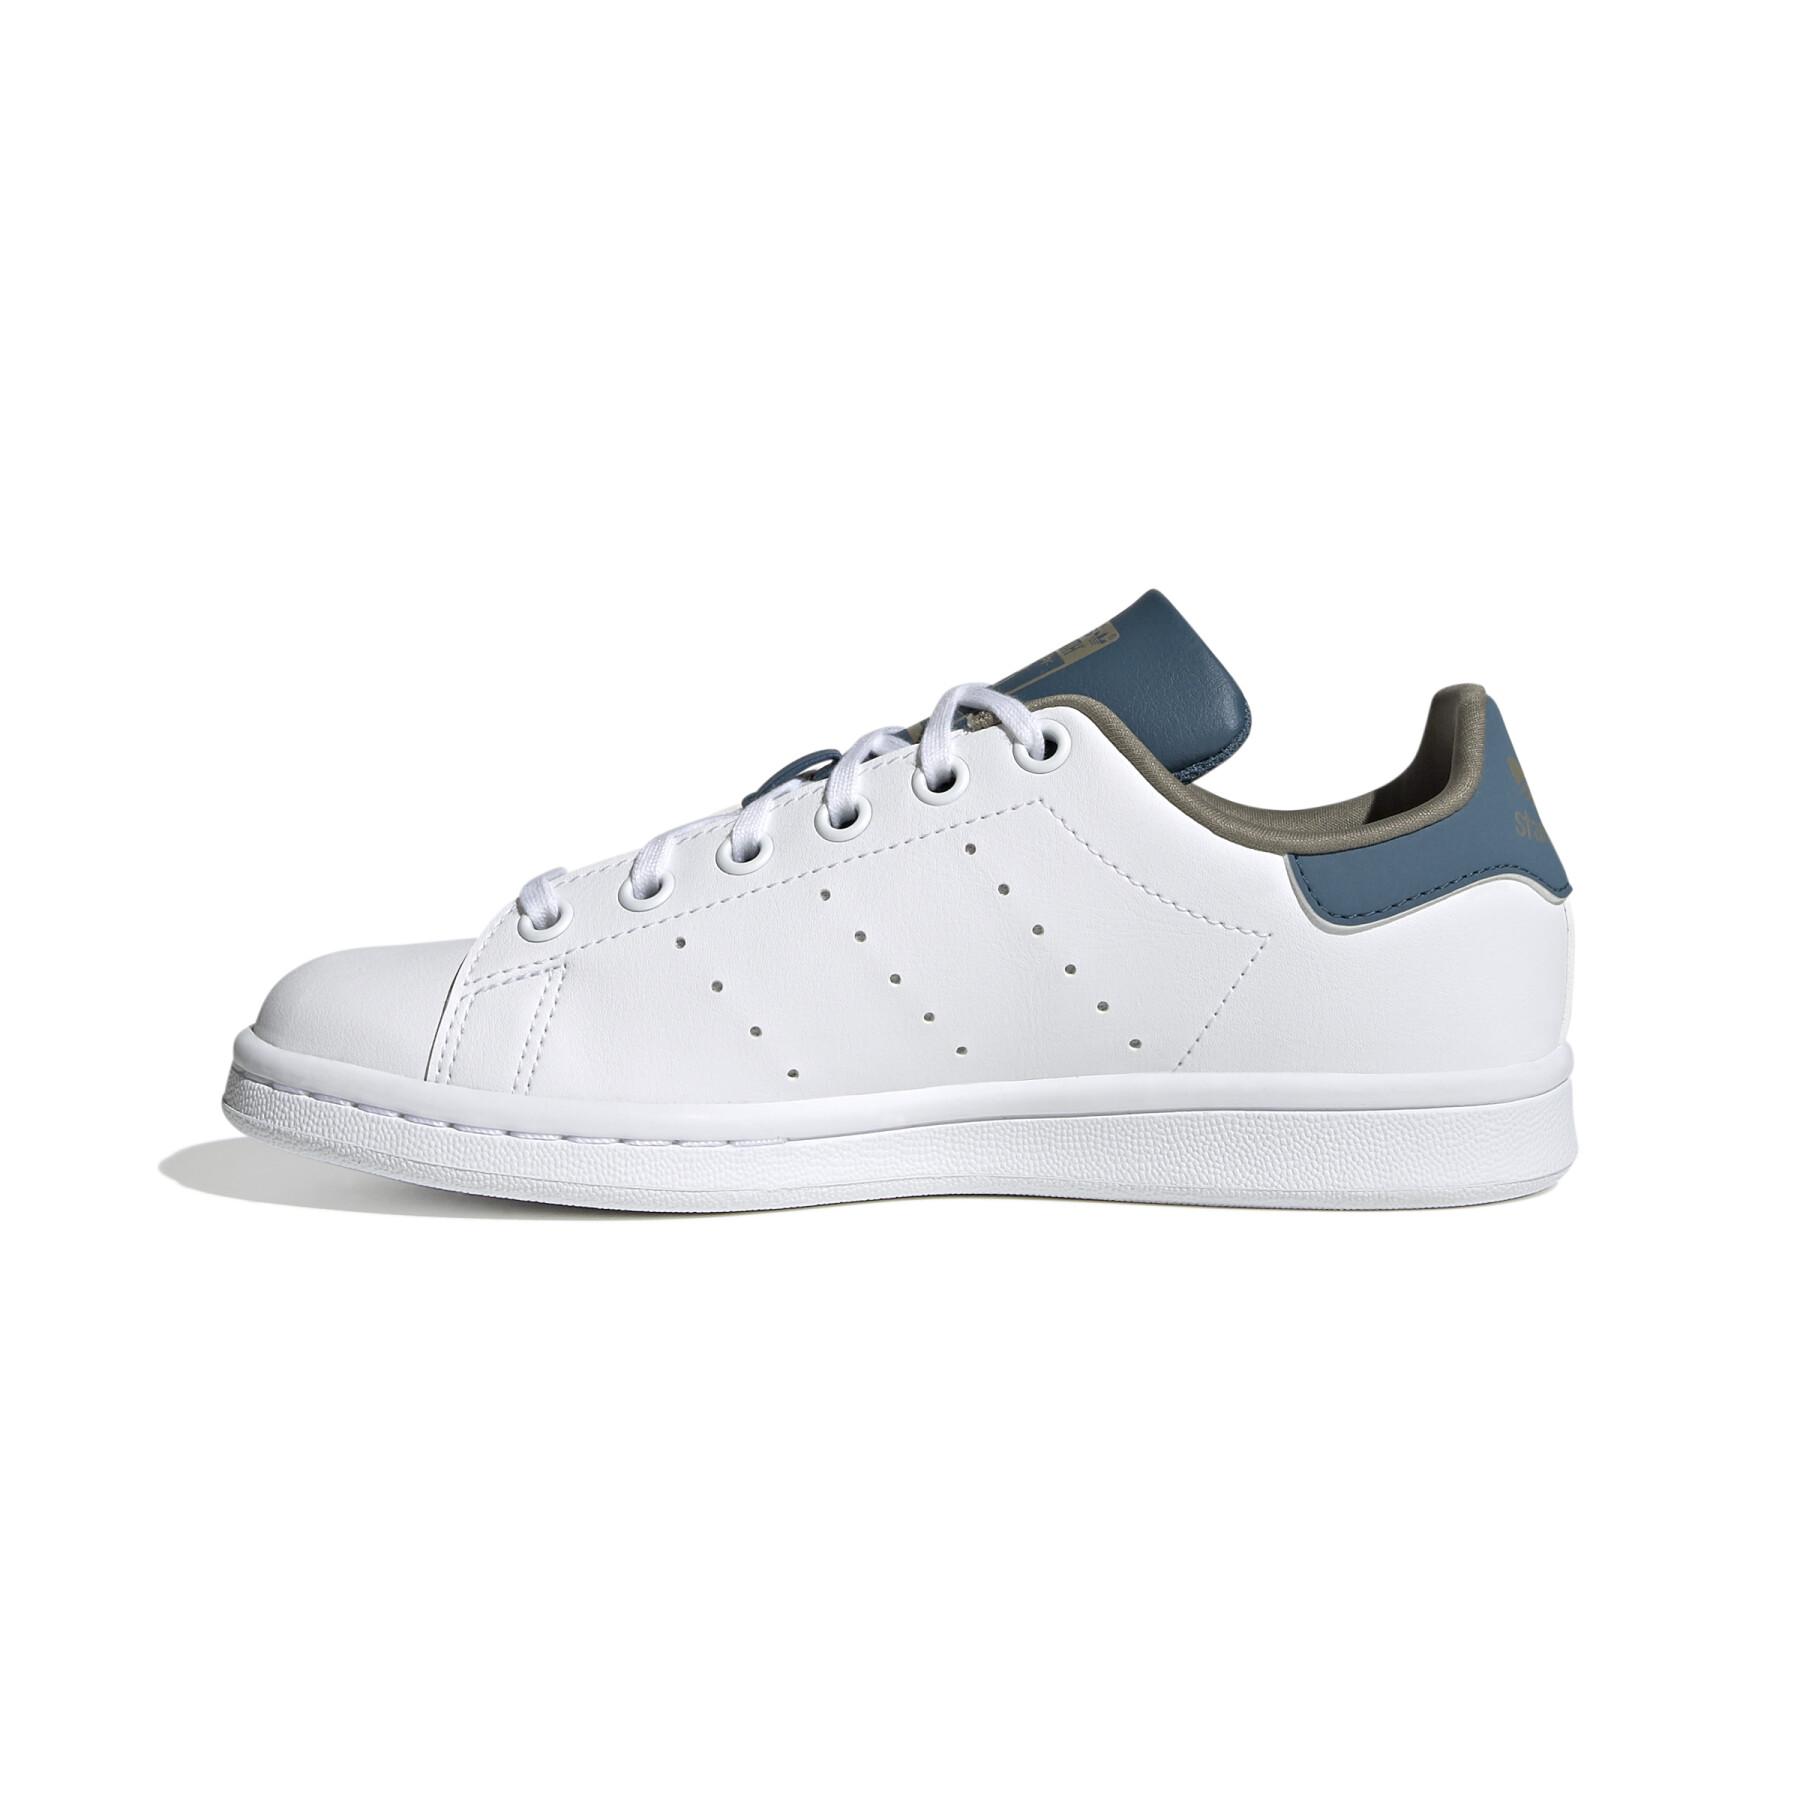 Chaussures enfant Adidas Stan Smith